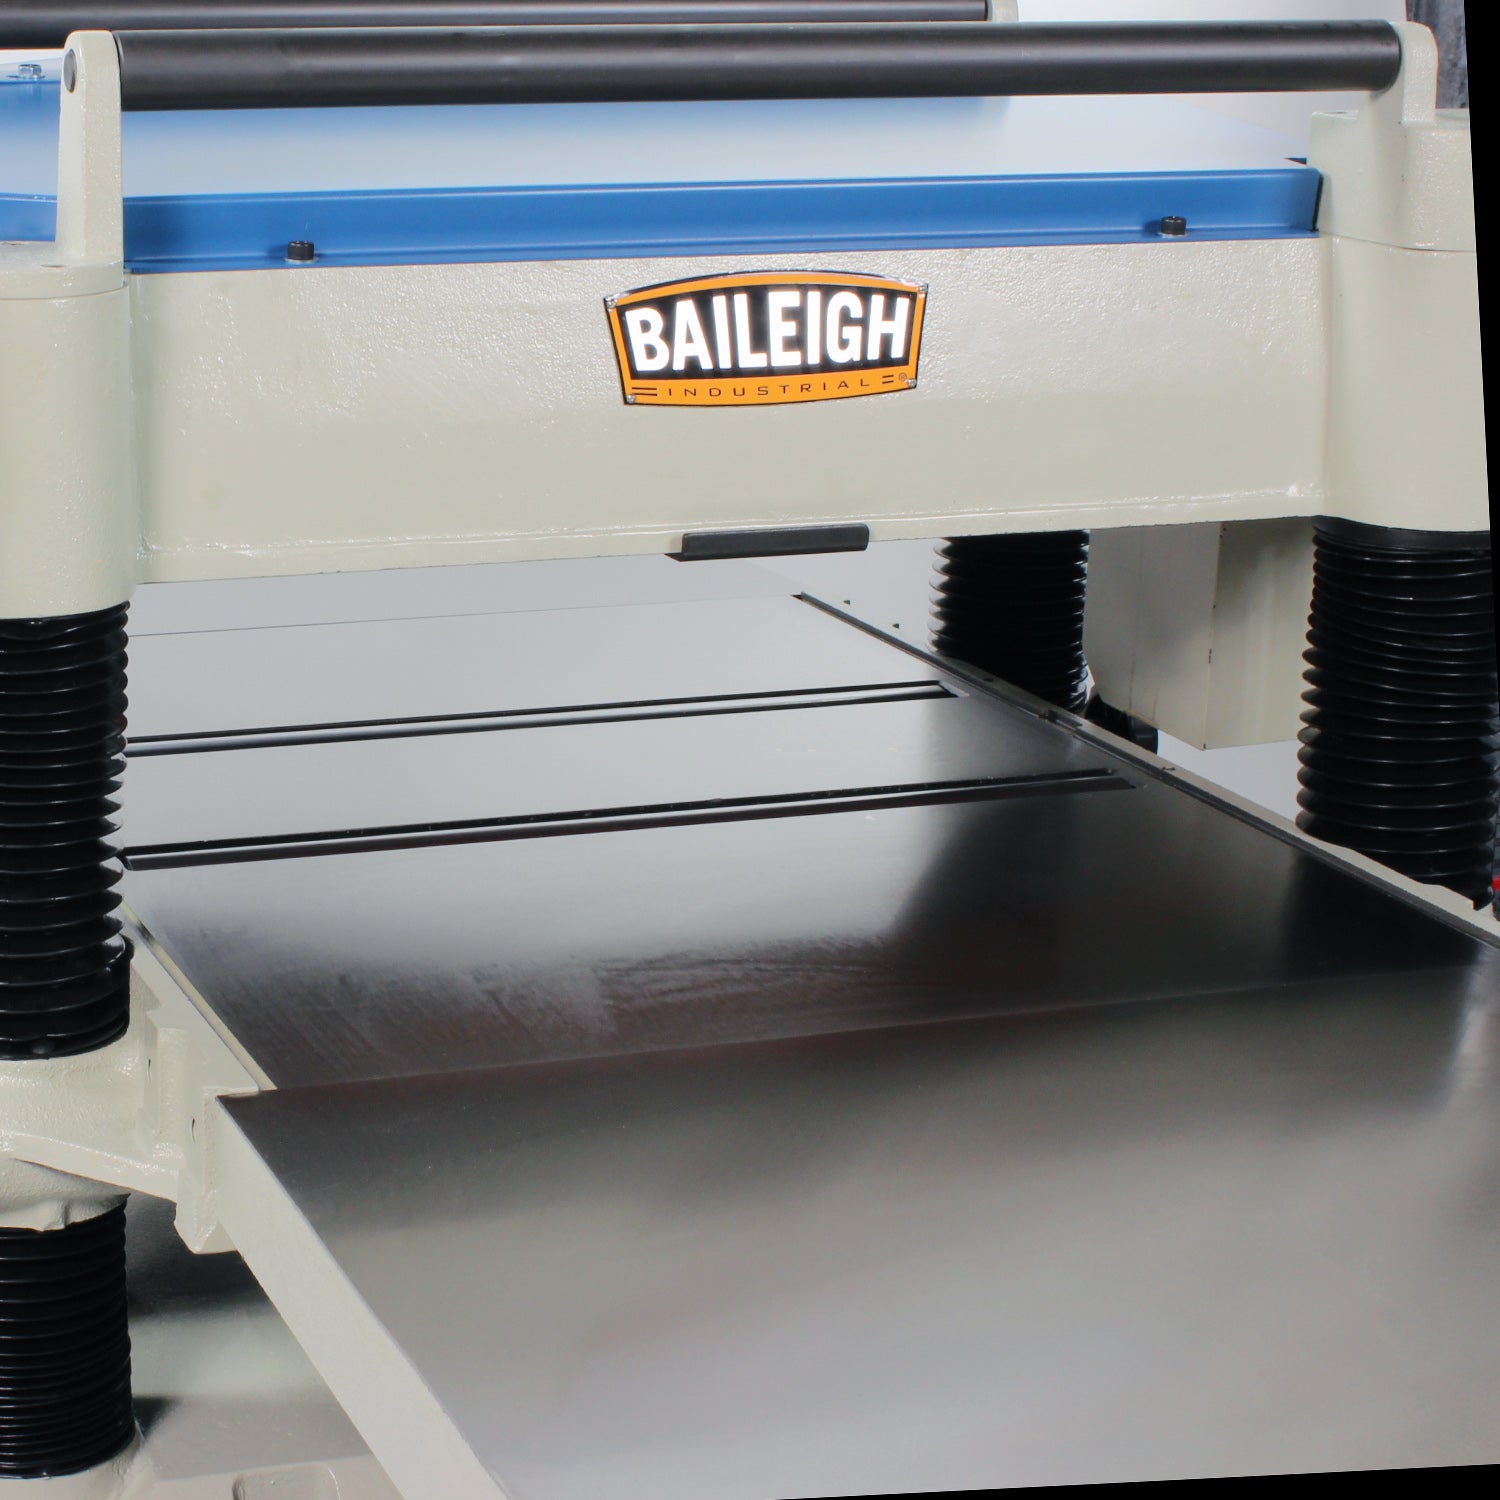 Baileigh IP-208-HH 220V 1 Phase 5HP 20" Industrial Planer w/ Helical Insert Head, 8" Maximum Cutting Height